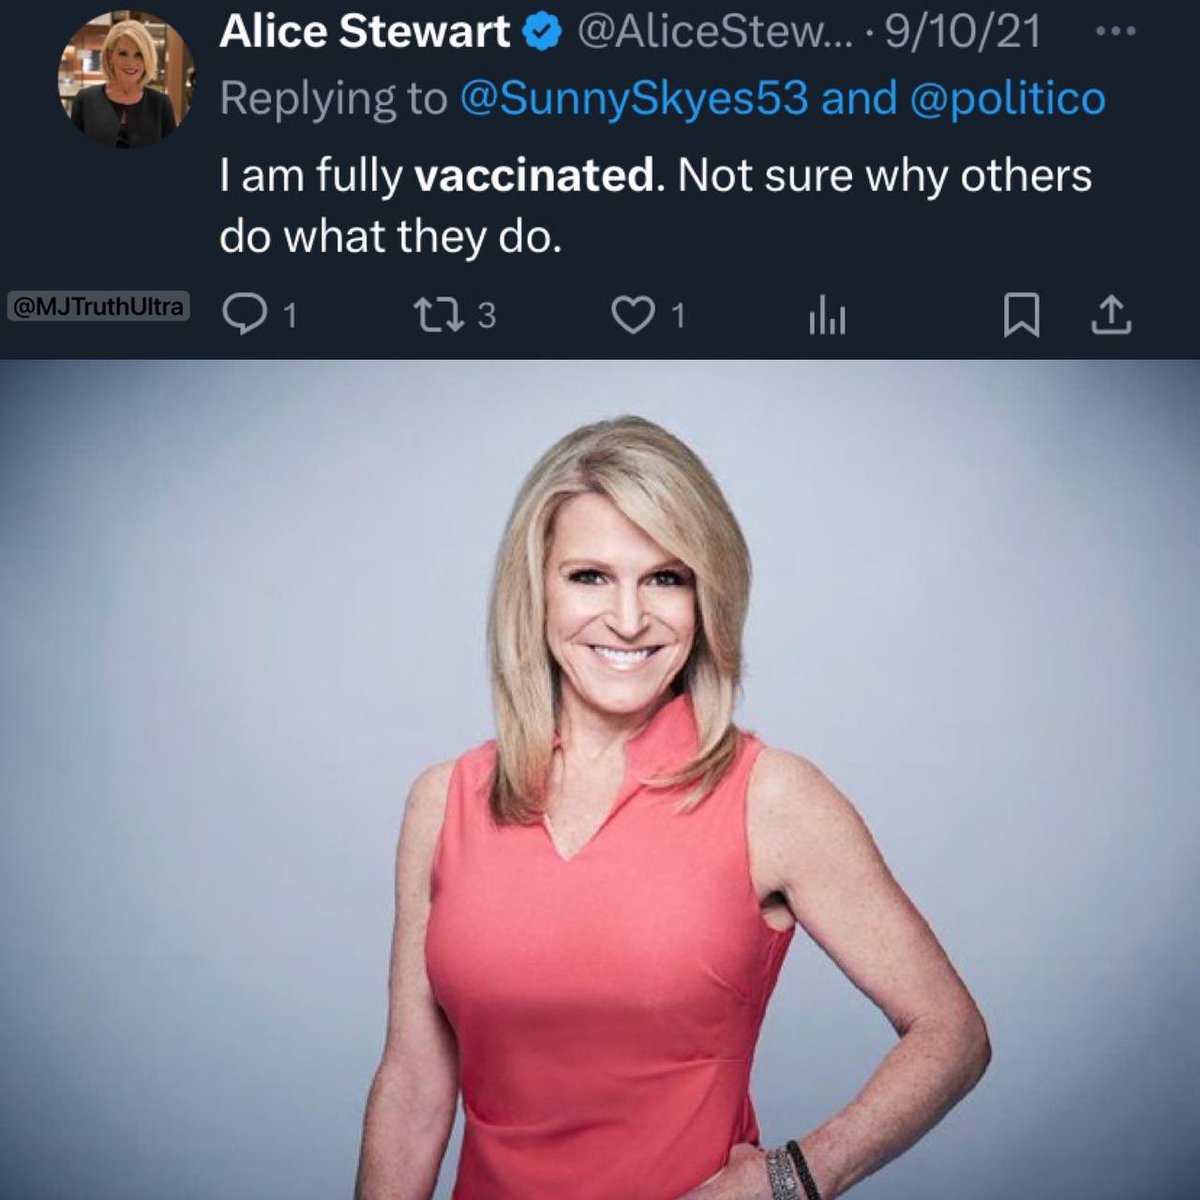 BREAKING: CNN Alice Stewart died Suddenly She was found outdoors early this morning… I’m sure it has nothing to do with that tweet.